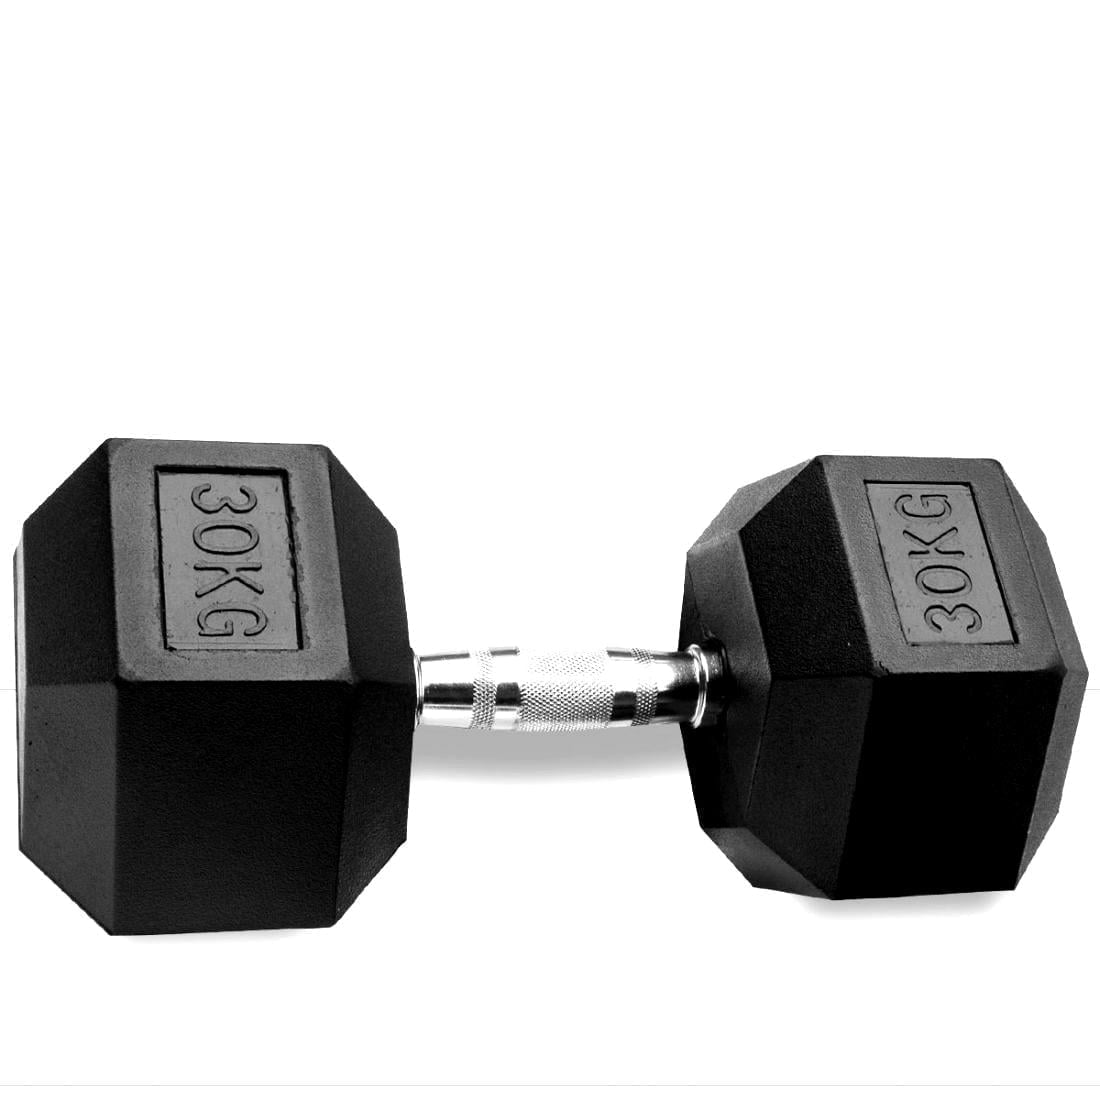 Rubber Hex Dumbbell That Doesnt Roll Or Damage Your Floor 30 Kg E1567702490862 Blackwhite Hex Dumbbells Are A Relatively Cheap Workout Enhancer, Increasing The Intensity Of Squat And Lunge Exercises As Well As A Variety Of Strength Training Exercises. The Hexagon Shape Stops Them From Rolling, And The Rubber Coating Prevents Damaging The Floor, Making Them Safe And Popular For Home Use. Hex Dumbbells Are Available In A Wide Range Of Weight Categories To Coordinate With Your Workout Regimen. Hex Rubber Dumbbell 30 Kg